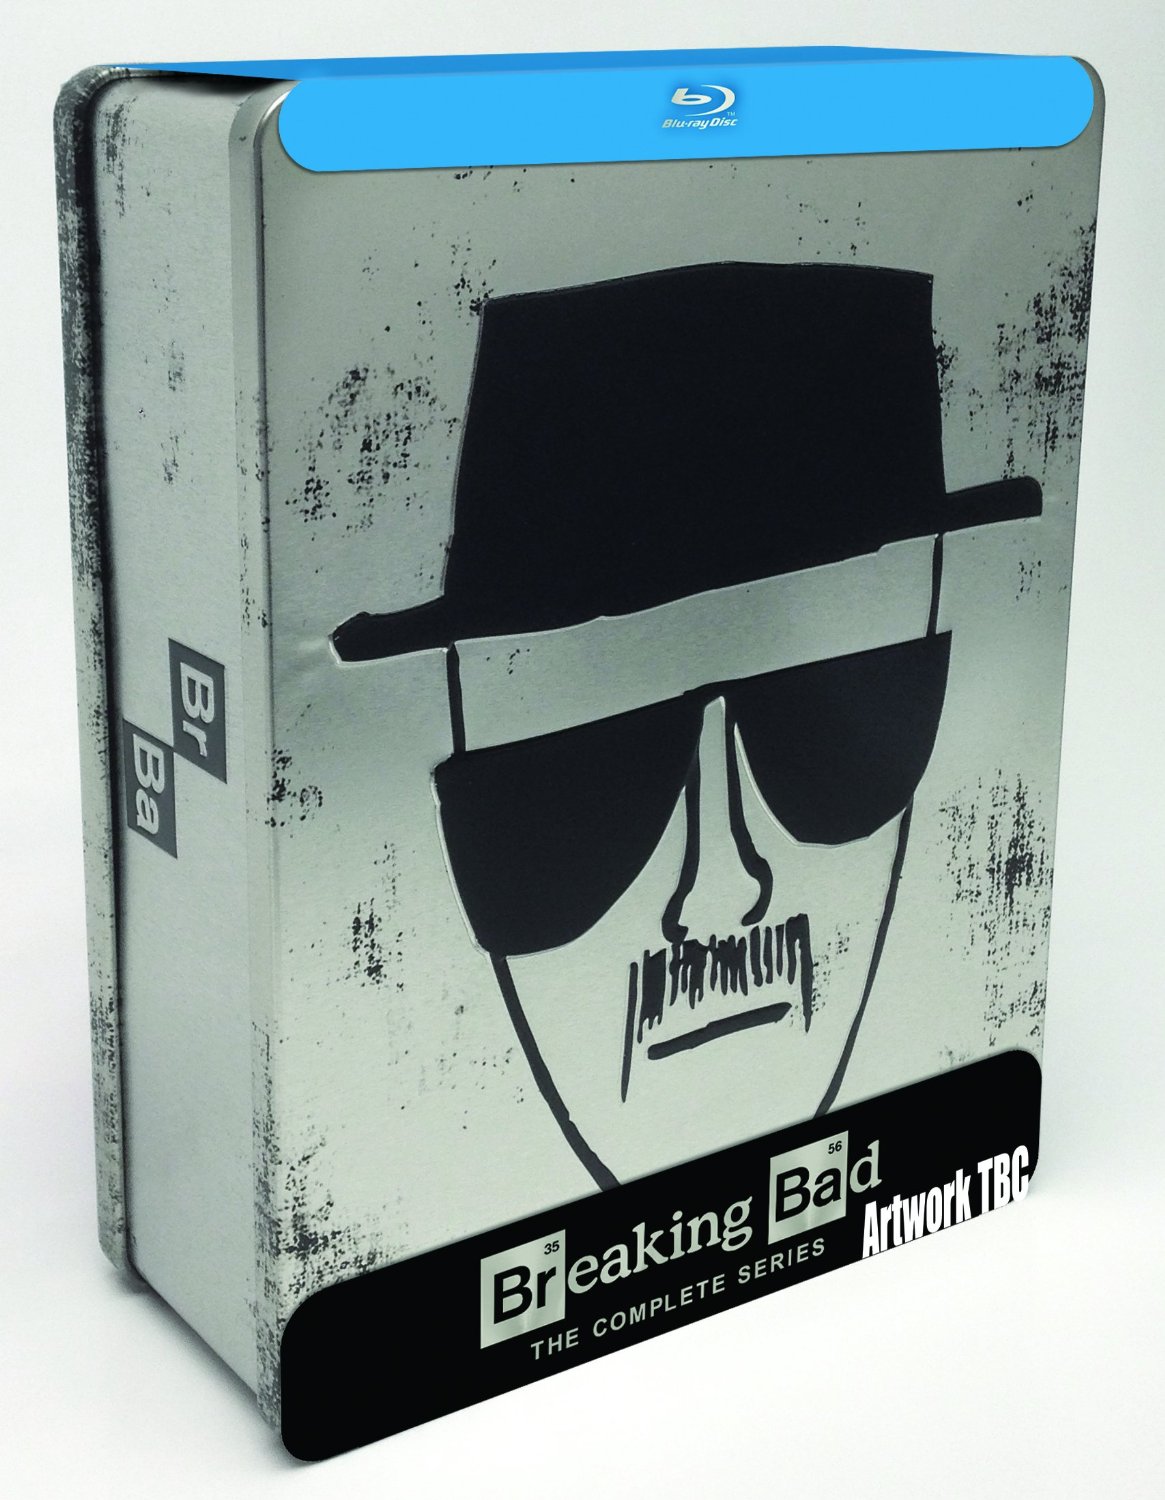 Breaking Bad - Complete Series Collector's Edition Tin (Exclusive to Amazon.co.uk) [Blu-ray]